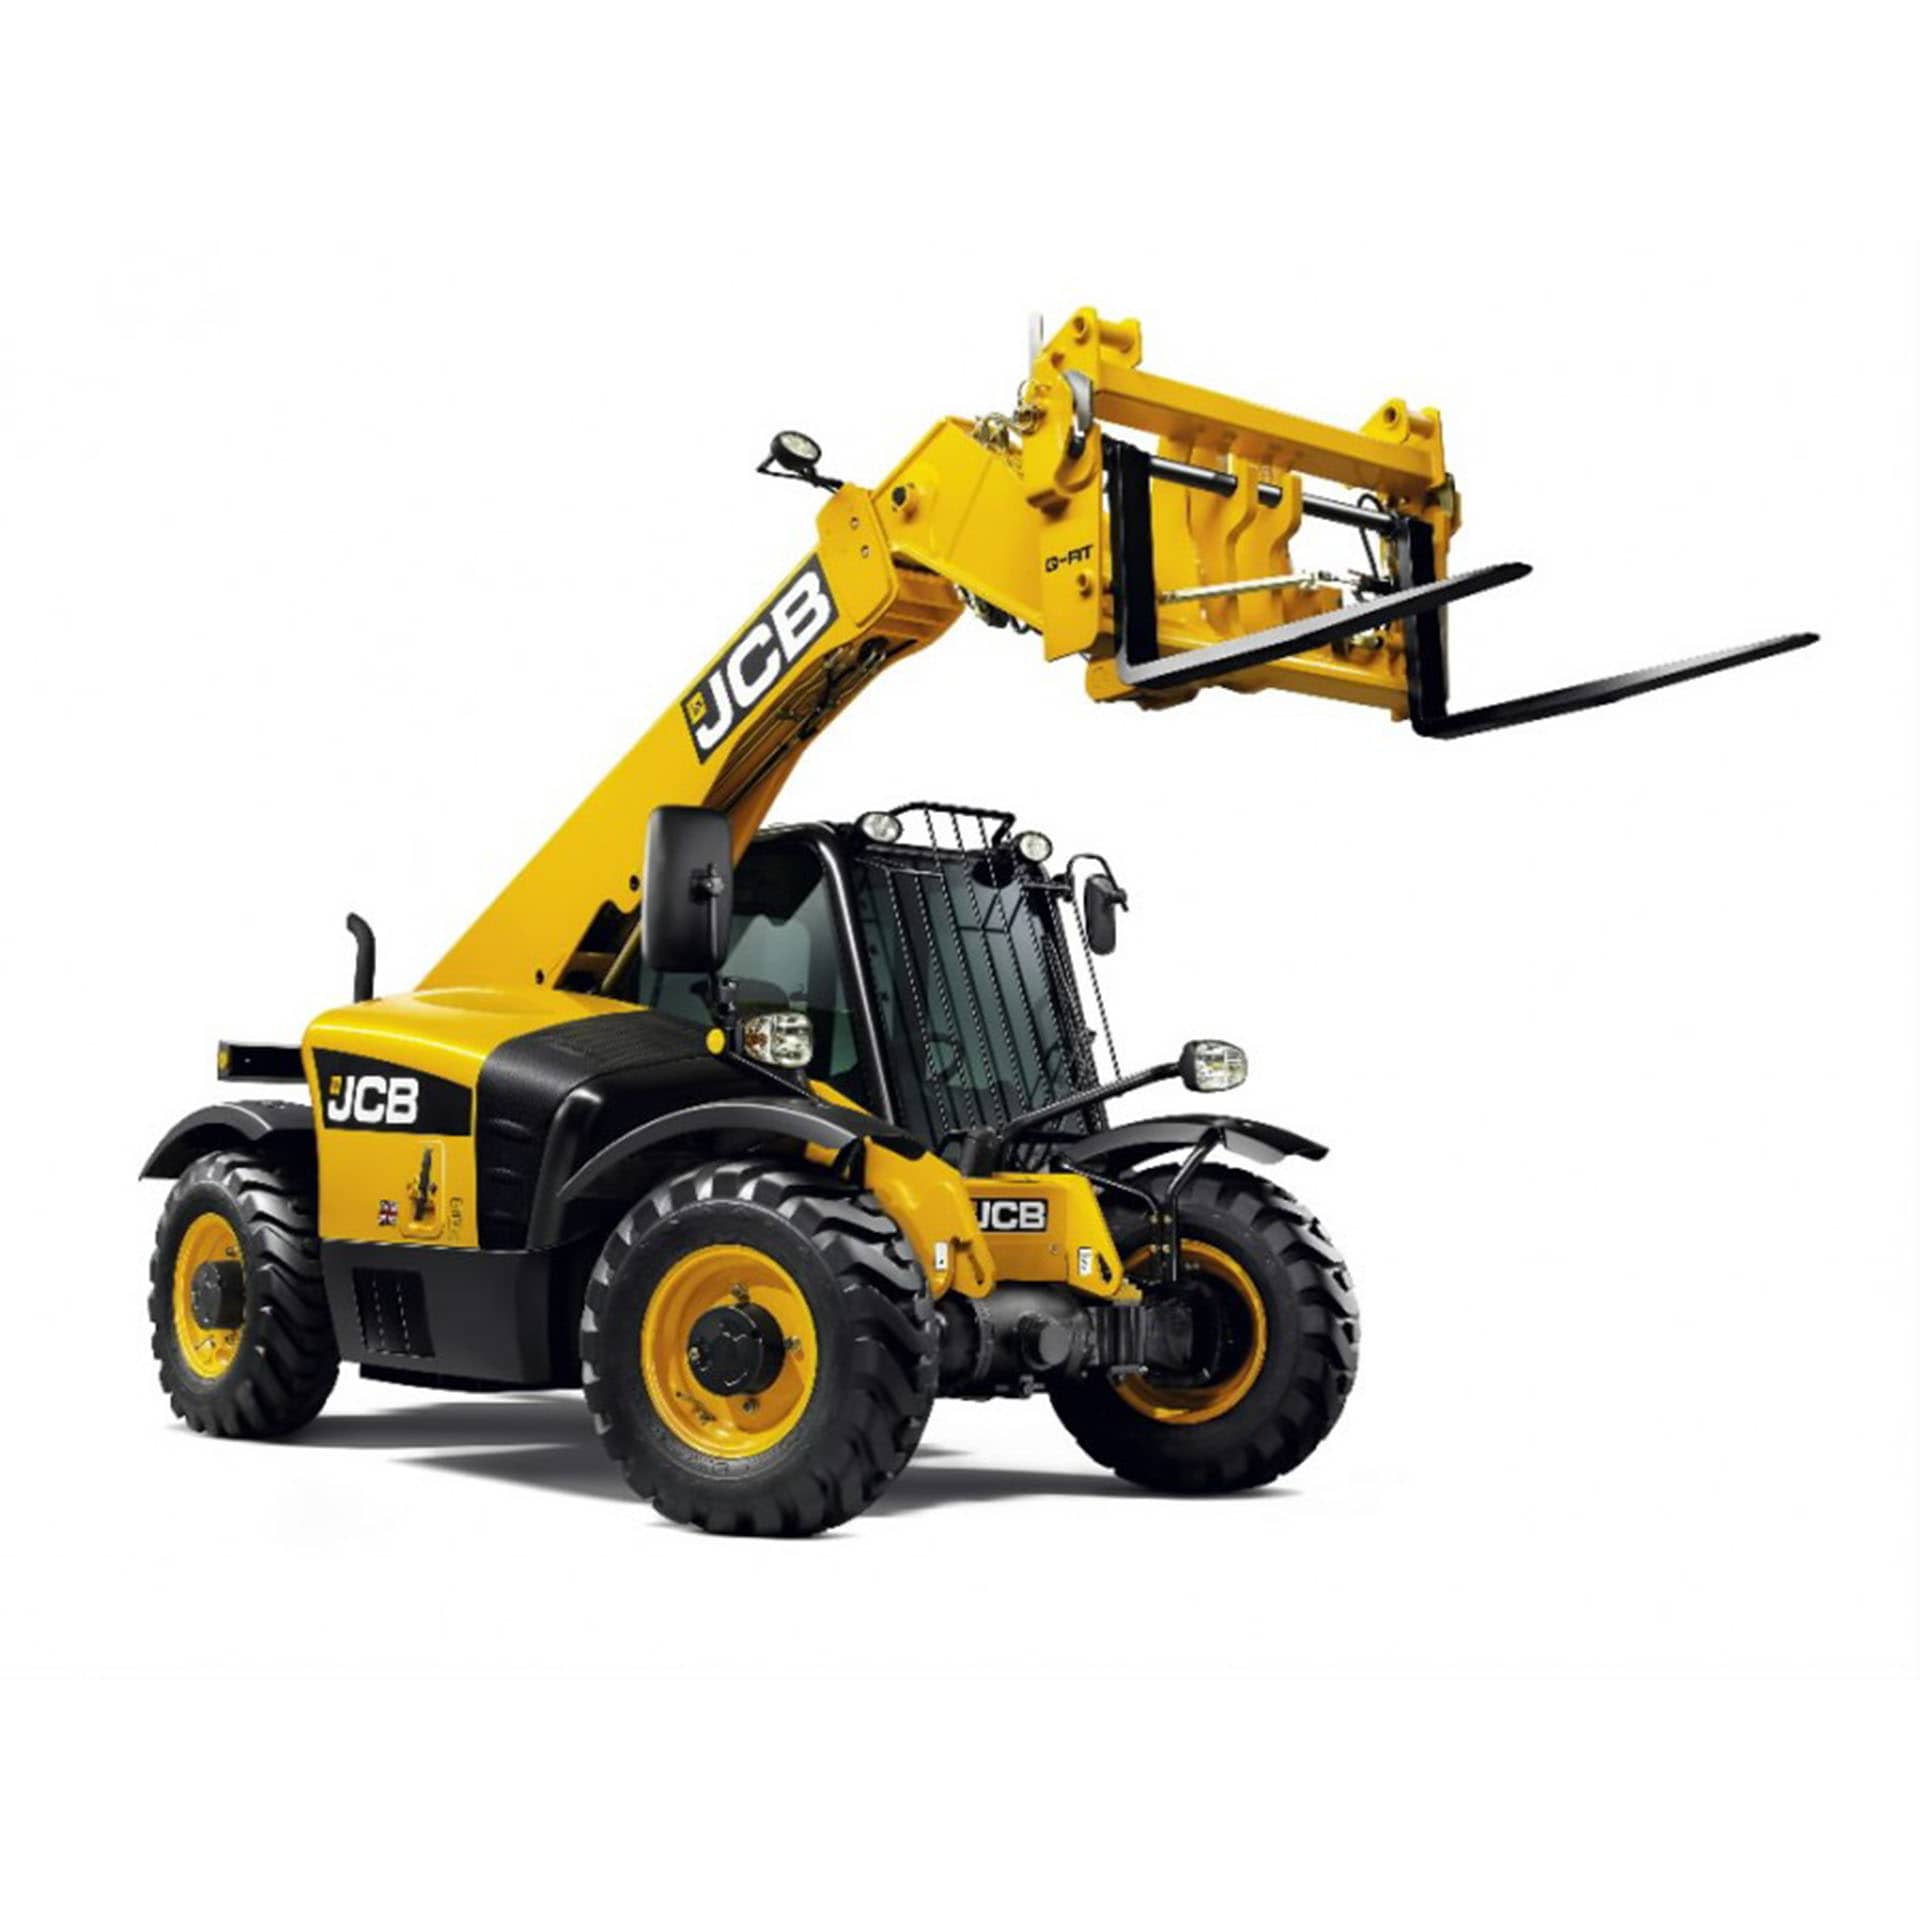 CPCS A17 - Telescopic Handler Training - GRANT FUNDED